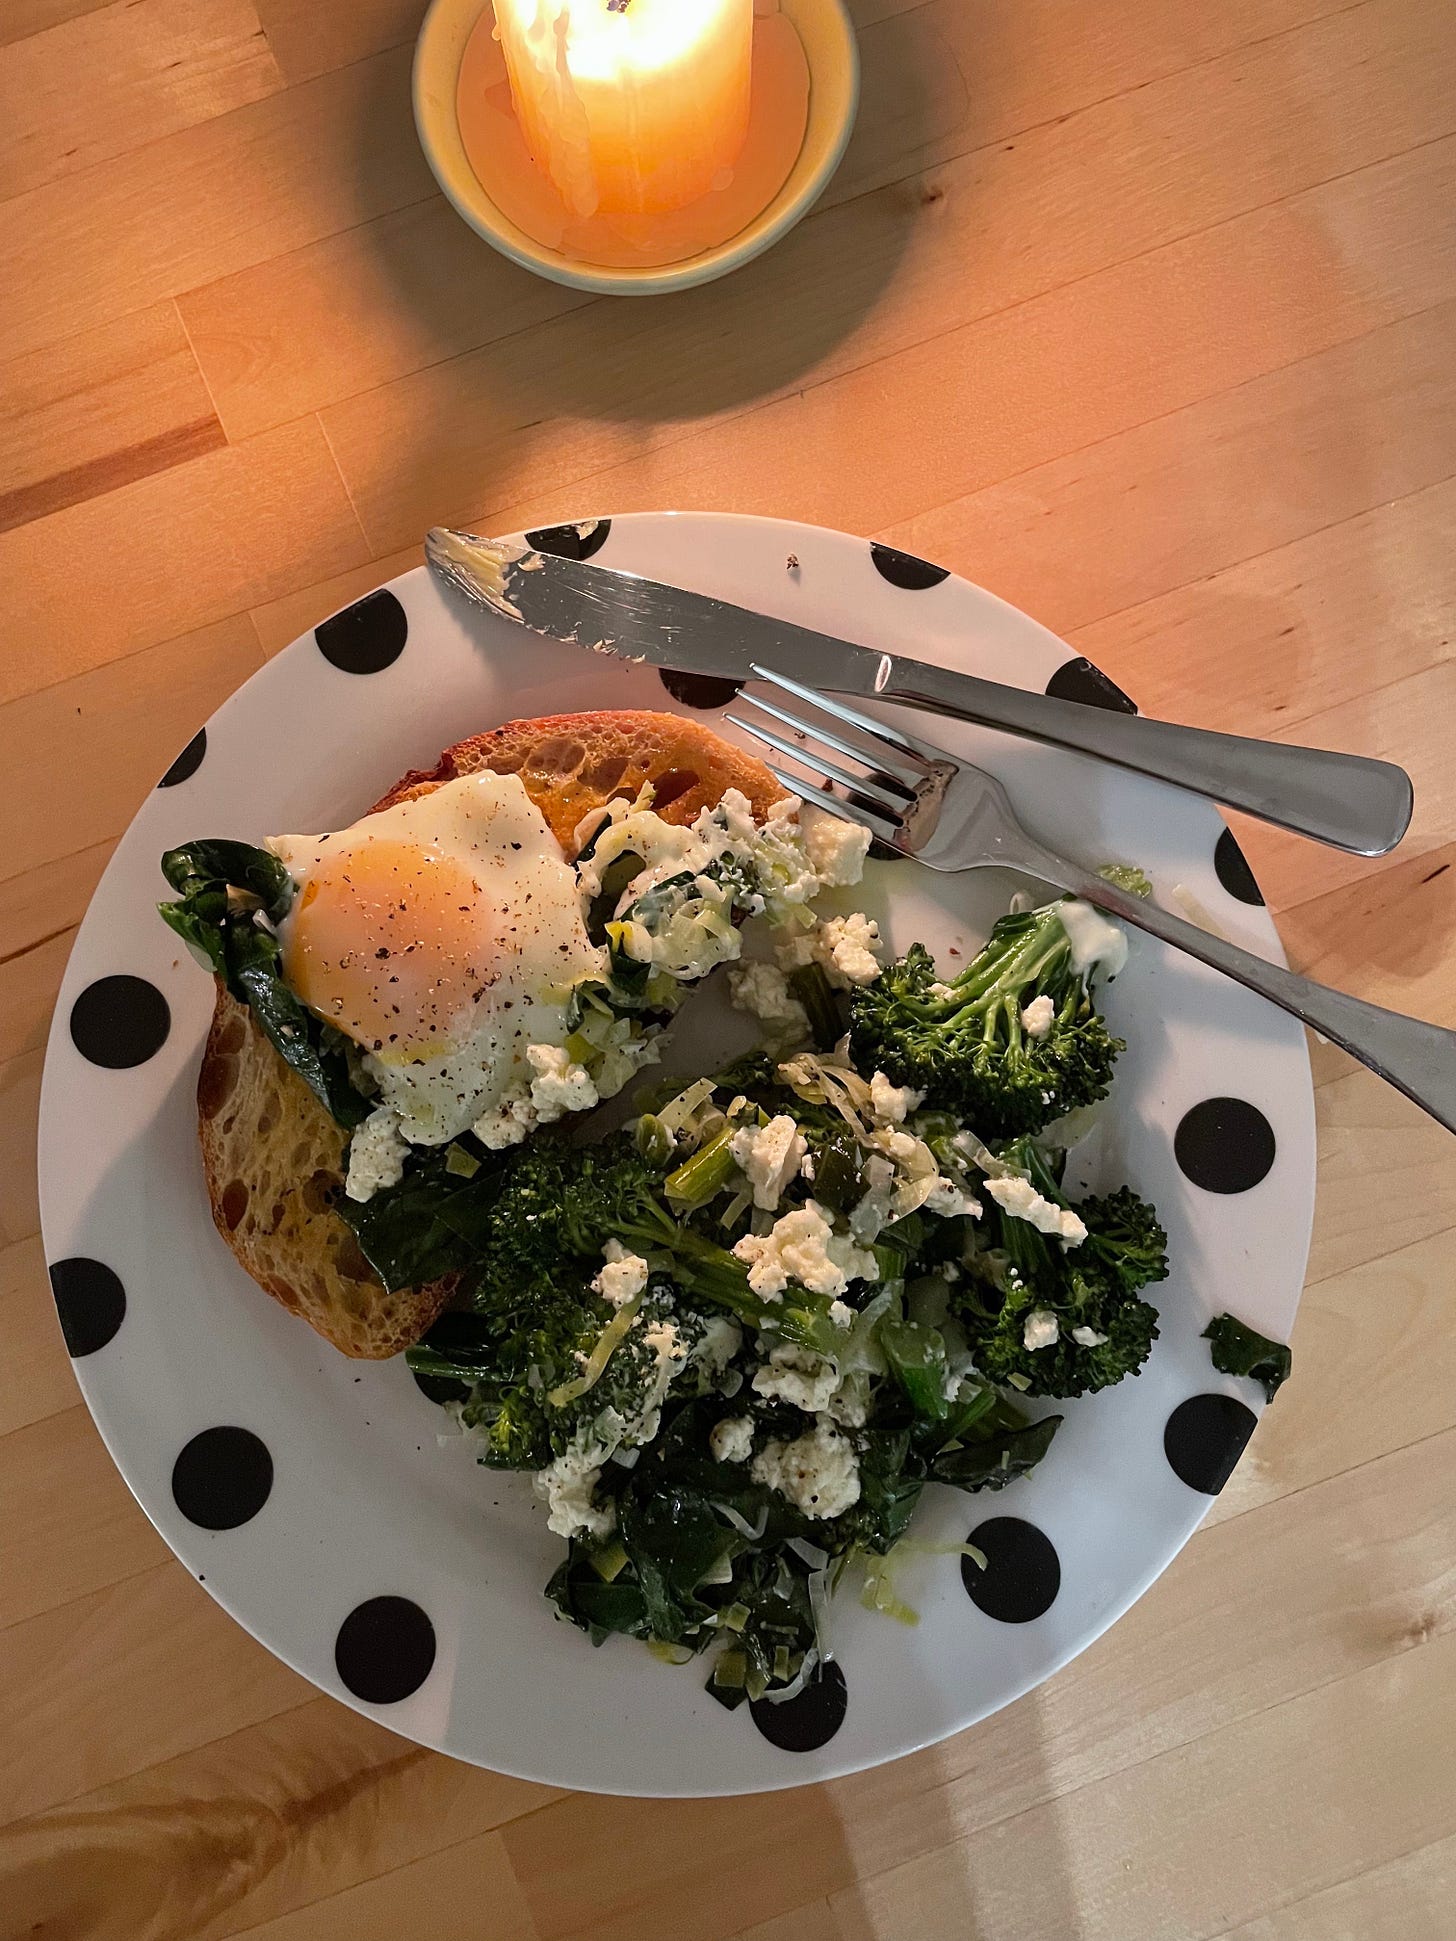 Buttered toast on a spotty place topped with a baked egg and braised green veggies and feta cheese.